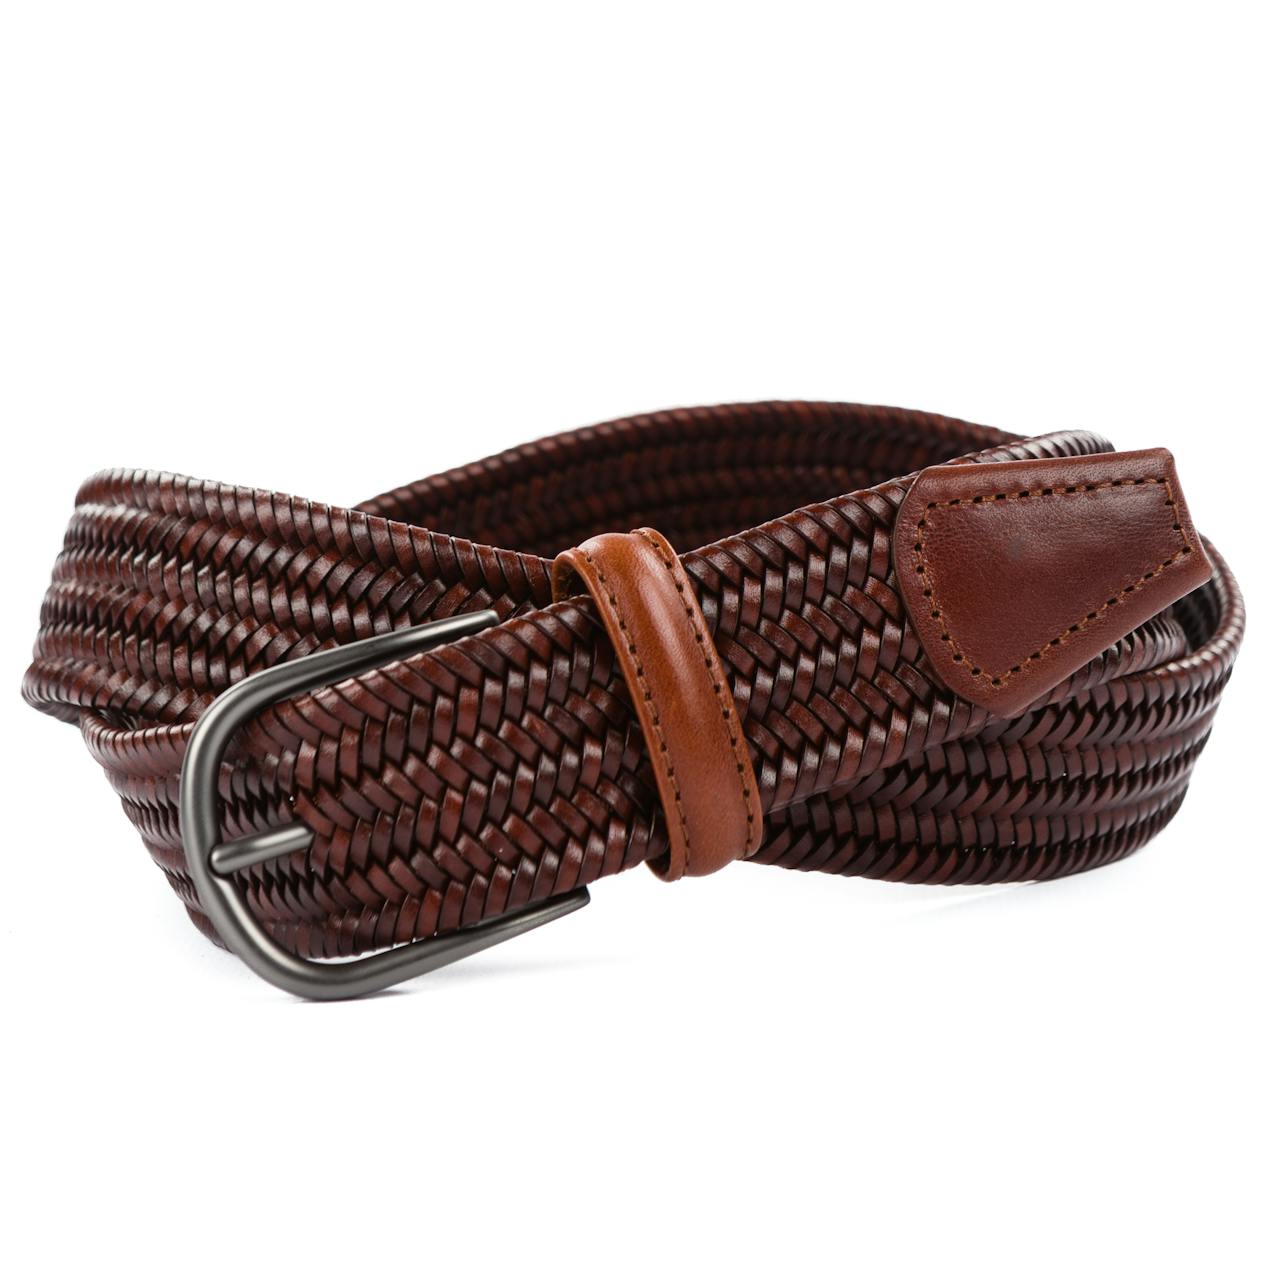 Anderson's Stretch woven leather belt